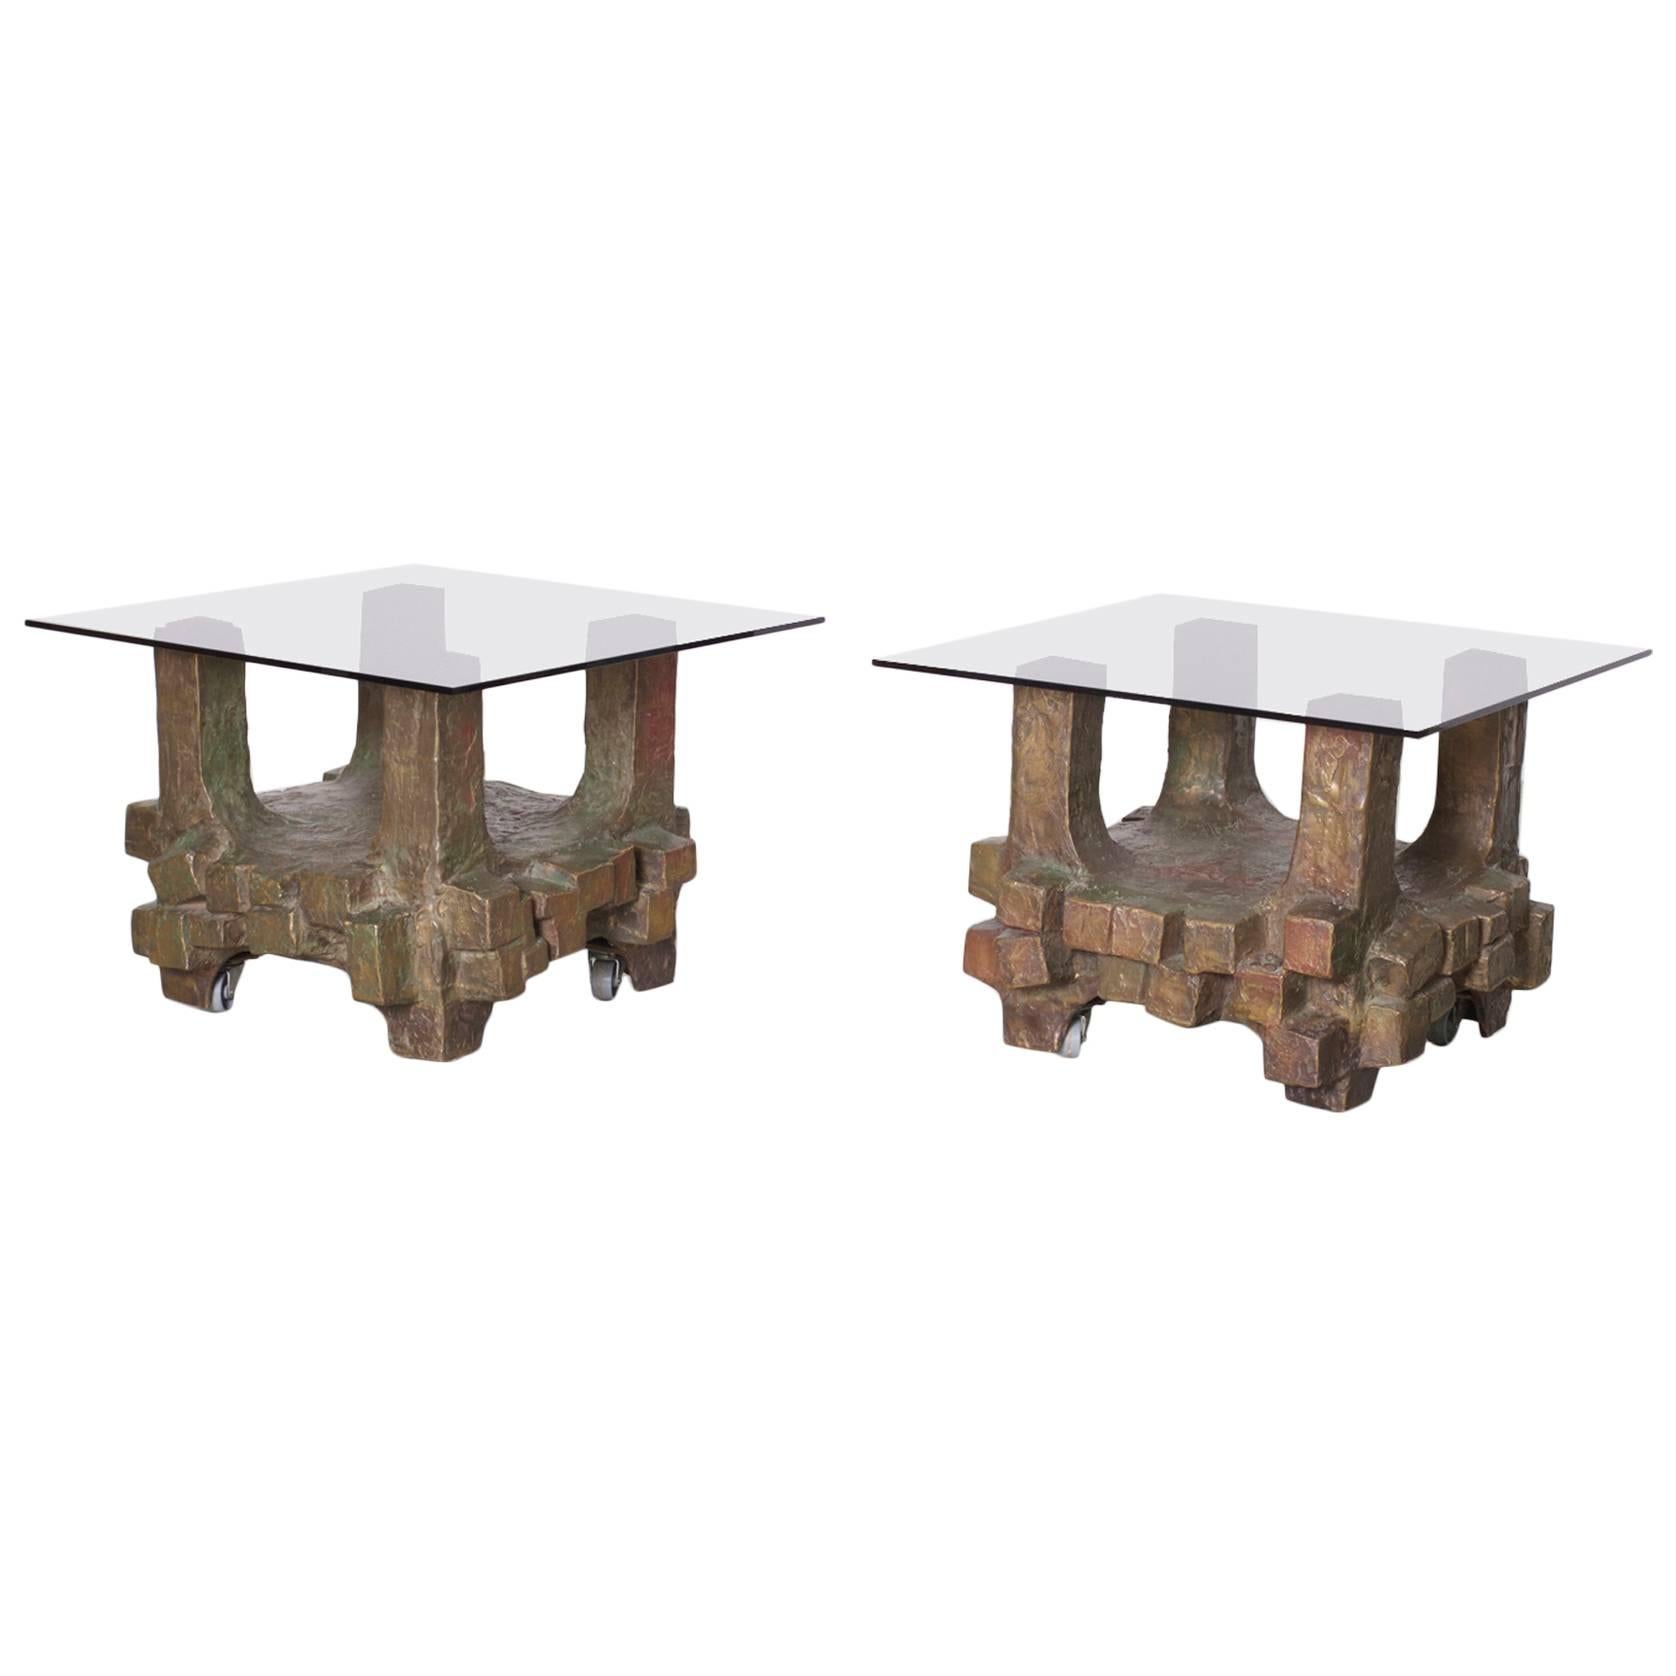 Unique Pair of Brutalist Bronze Side Tables in the Manner of Paul Evans